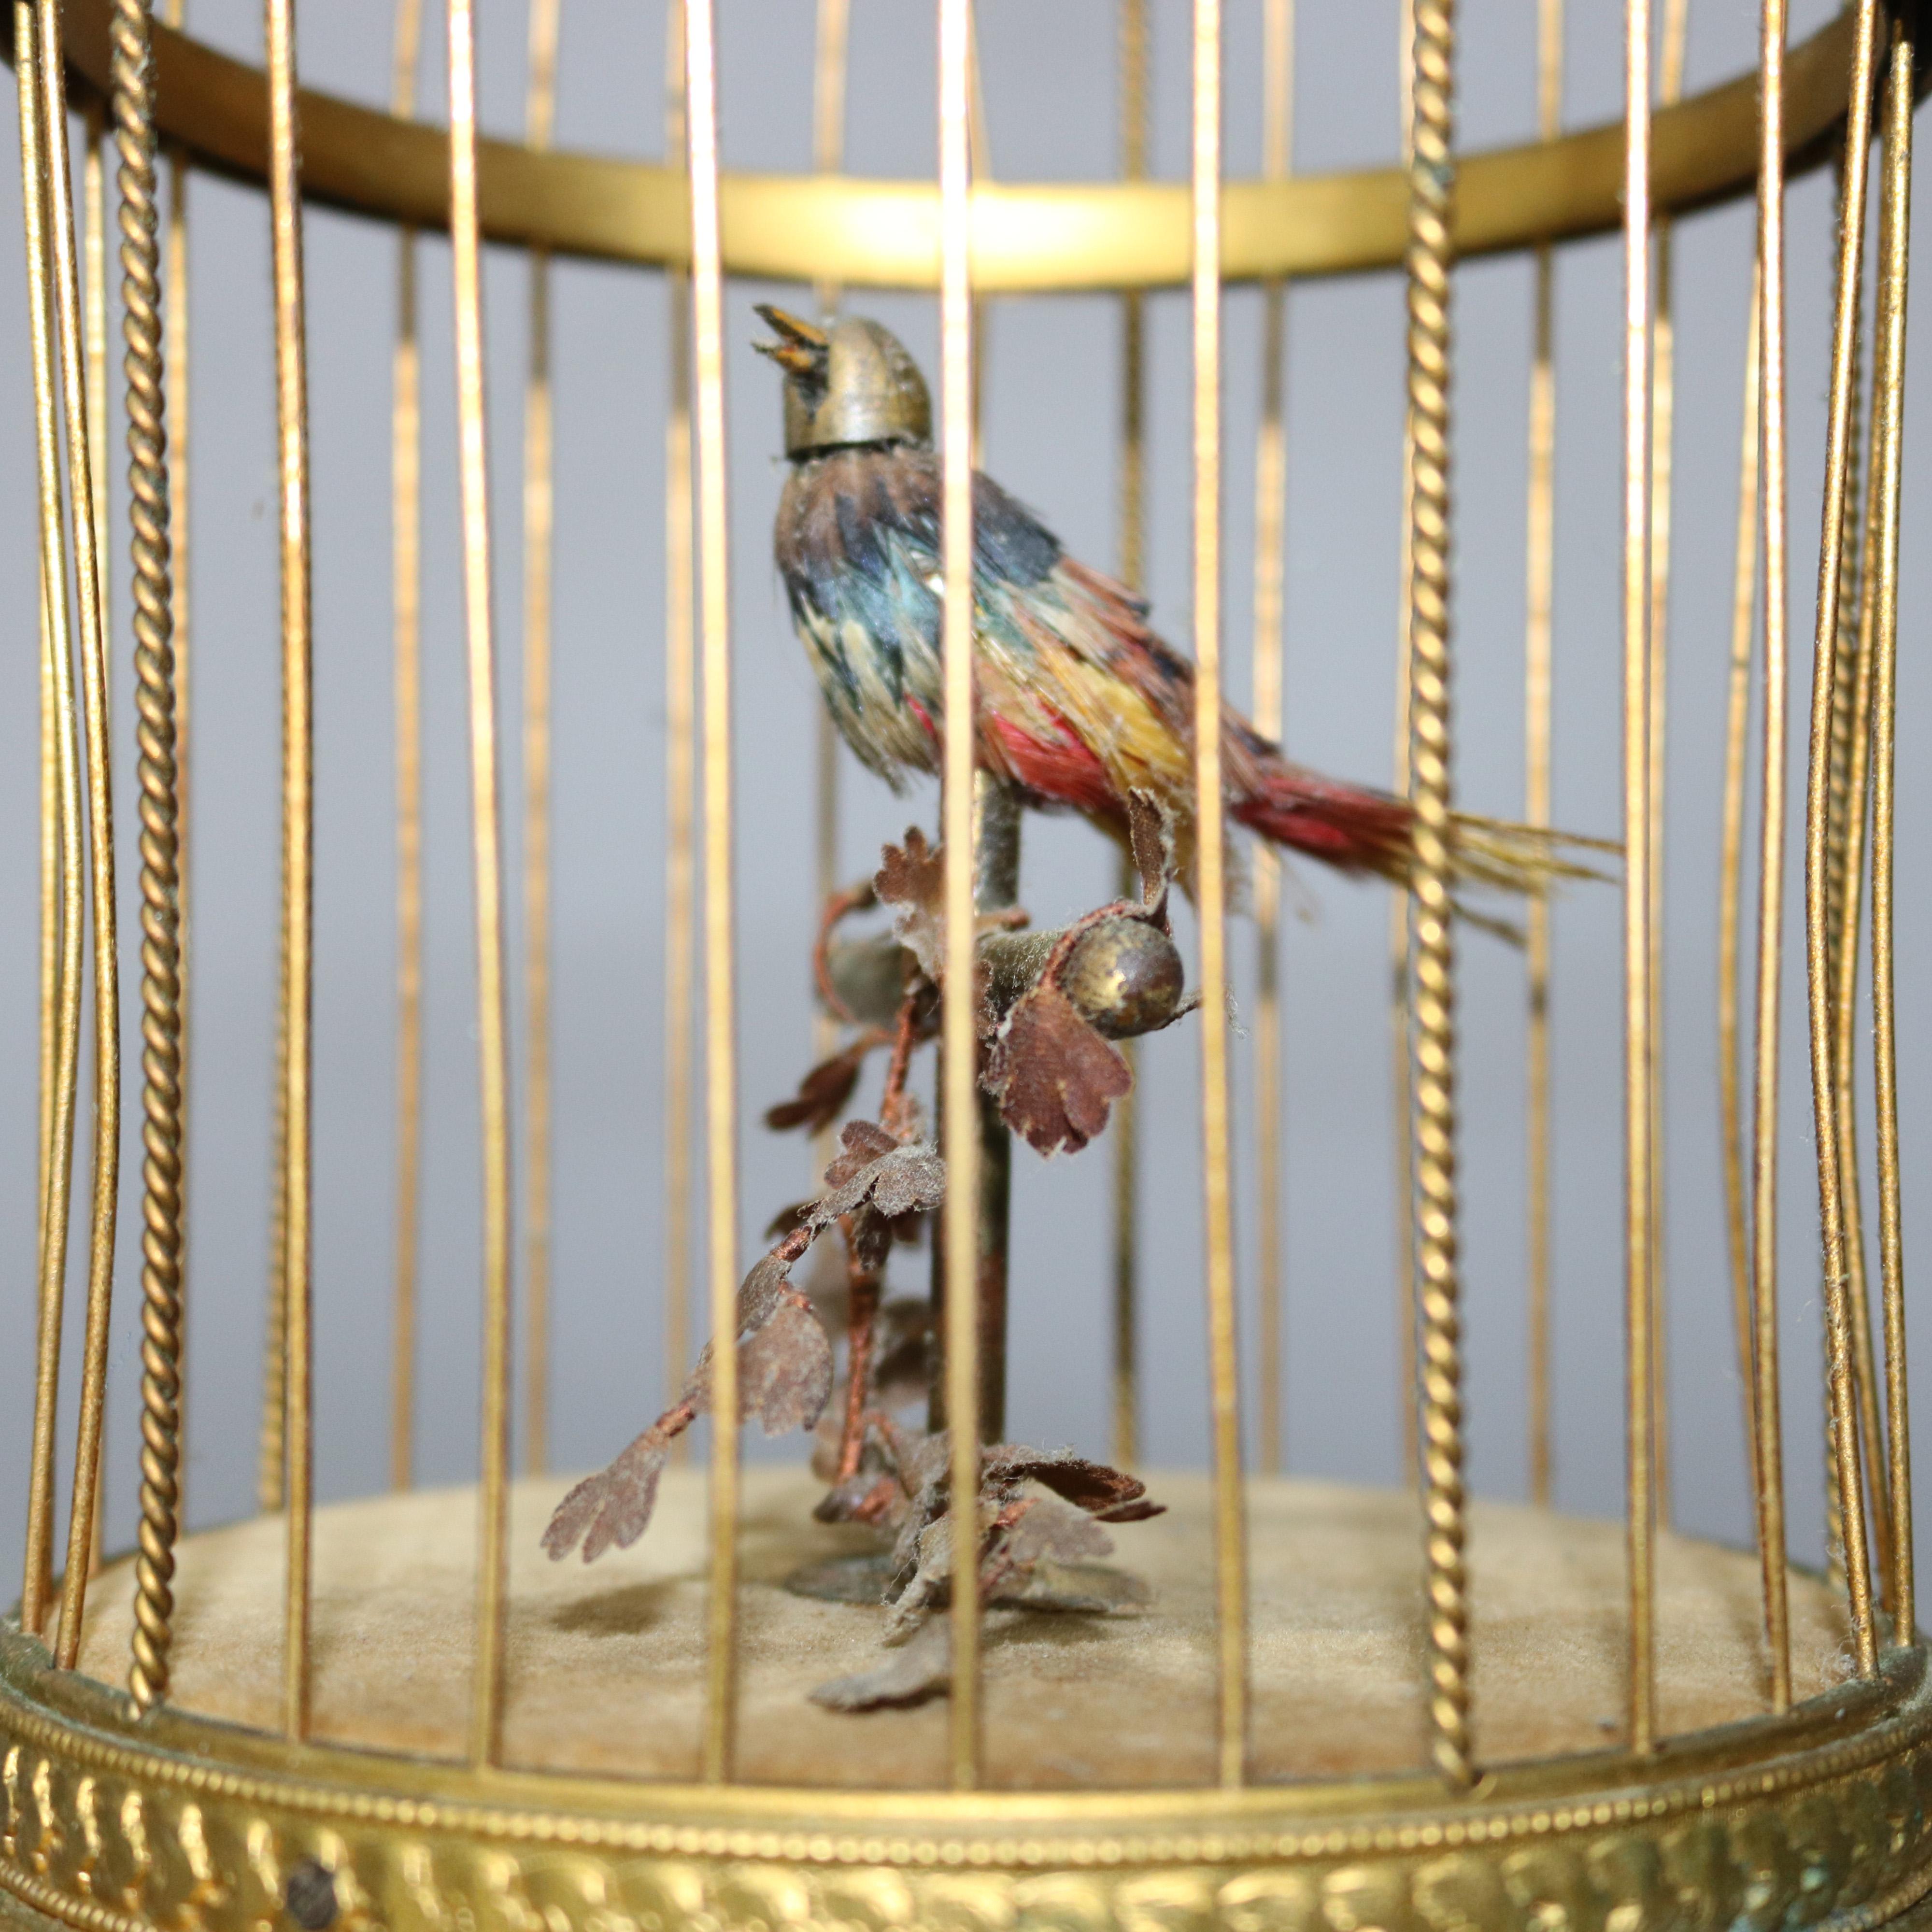 An antique French automaton music box offers singing bird seated on foliate branch in brass cage, circa 1880

***DELIVERY NOTICE – Due to COVID-19 we are employing NO-CONTACT PRACTICES in the transfer of purchased items.  Additionally, for those who